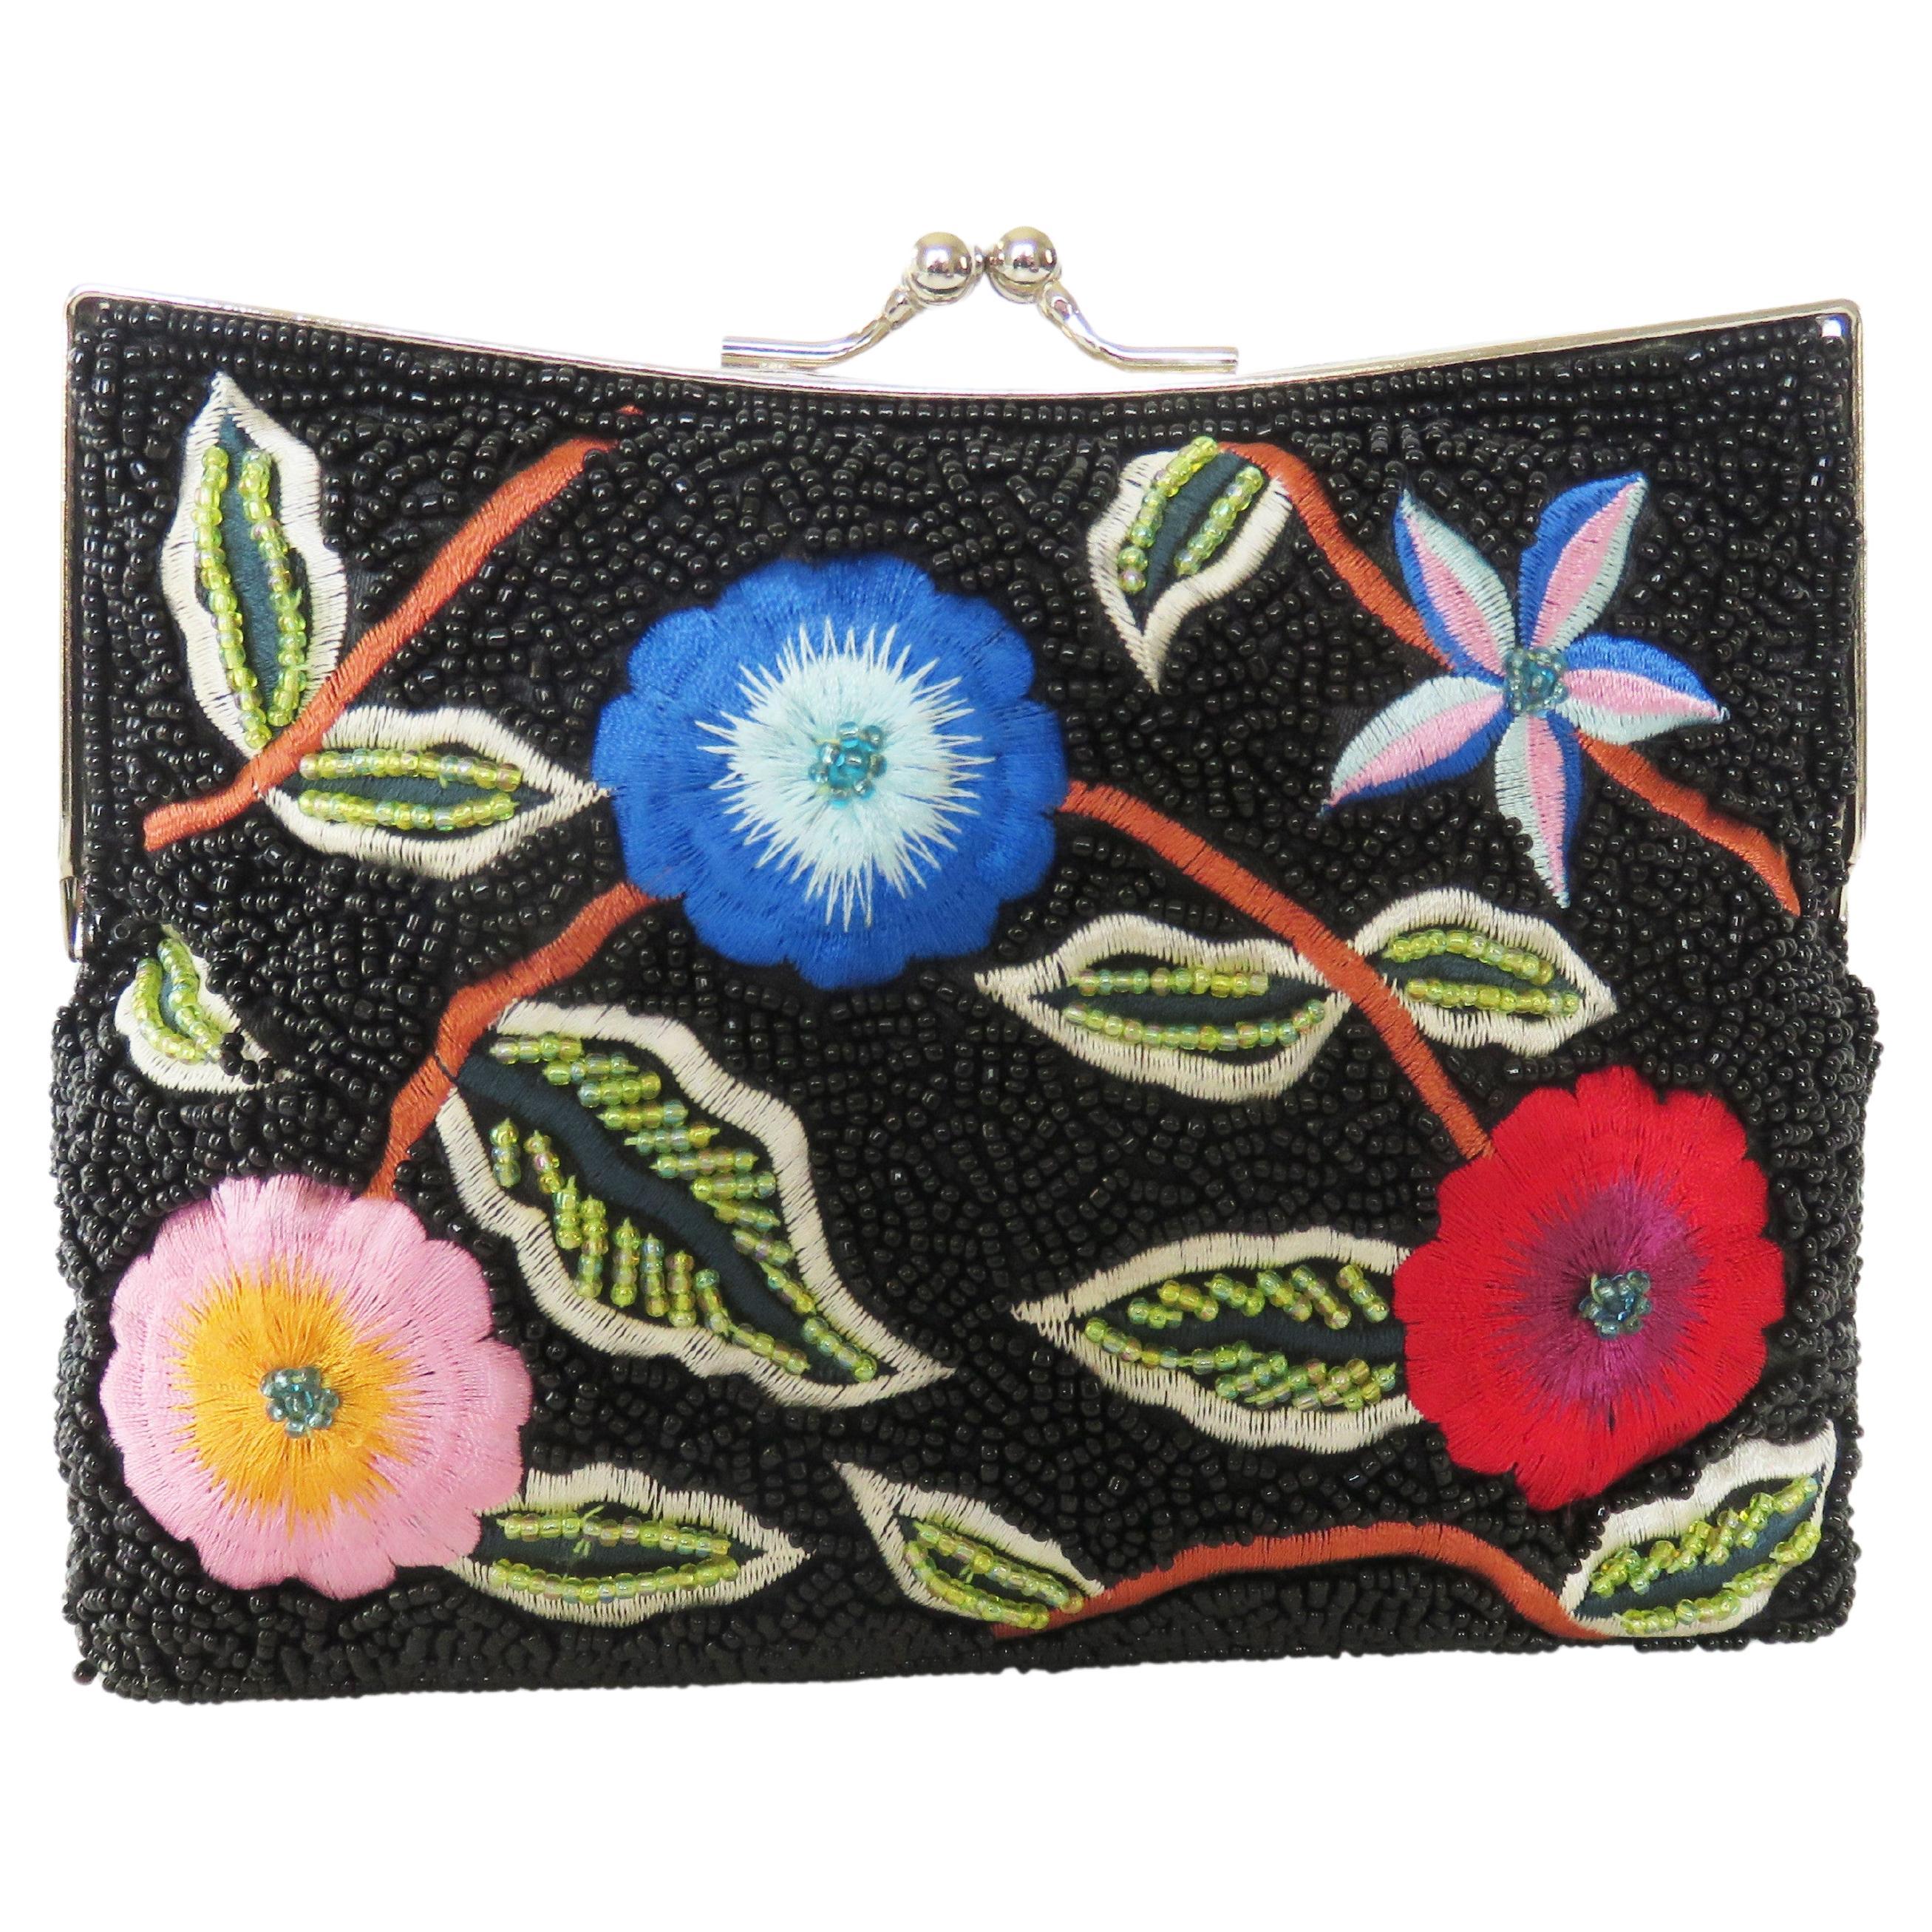 Beaded and Embroidery Clutch with Optional Chain Shoulder Strap 1980s For Sale